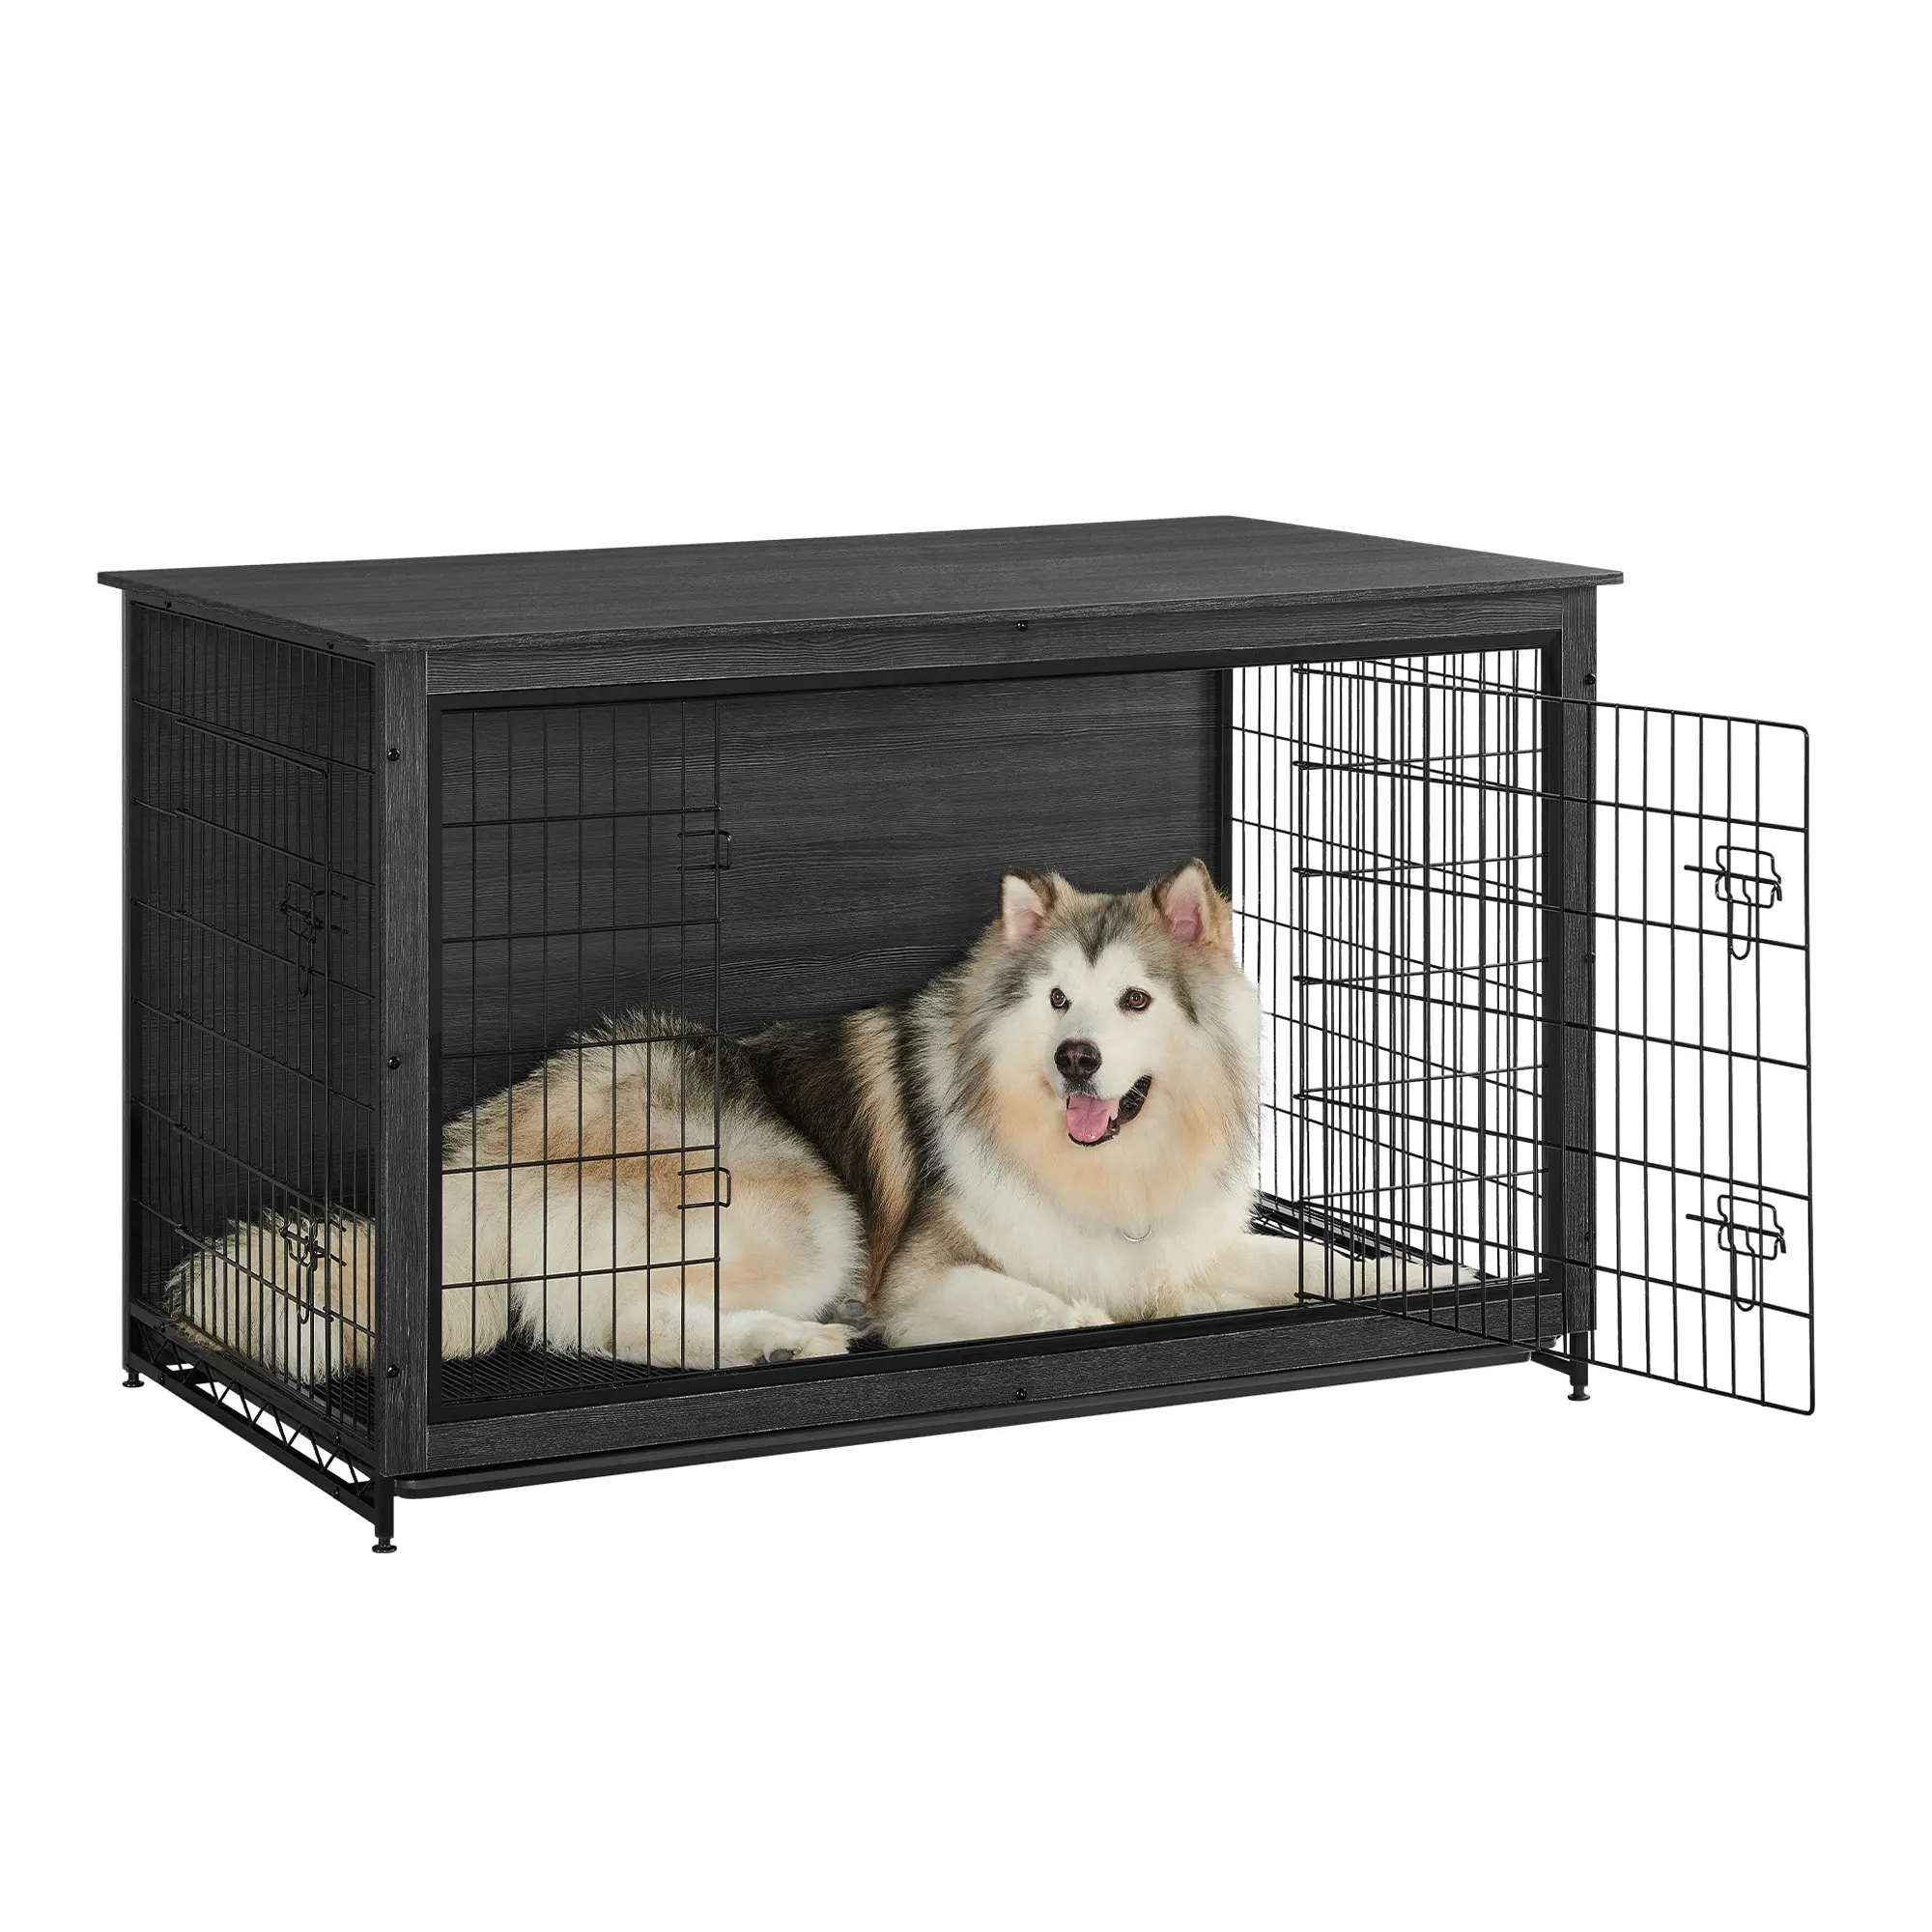 Feandrea High Quality Customizable Dog Cages Crates for Large Dog Wholesale Dog Kennel with Wood Top and Metal Doors